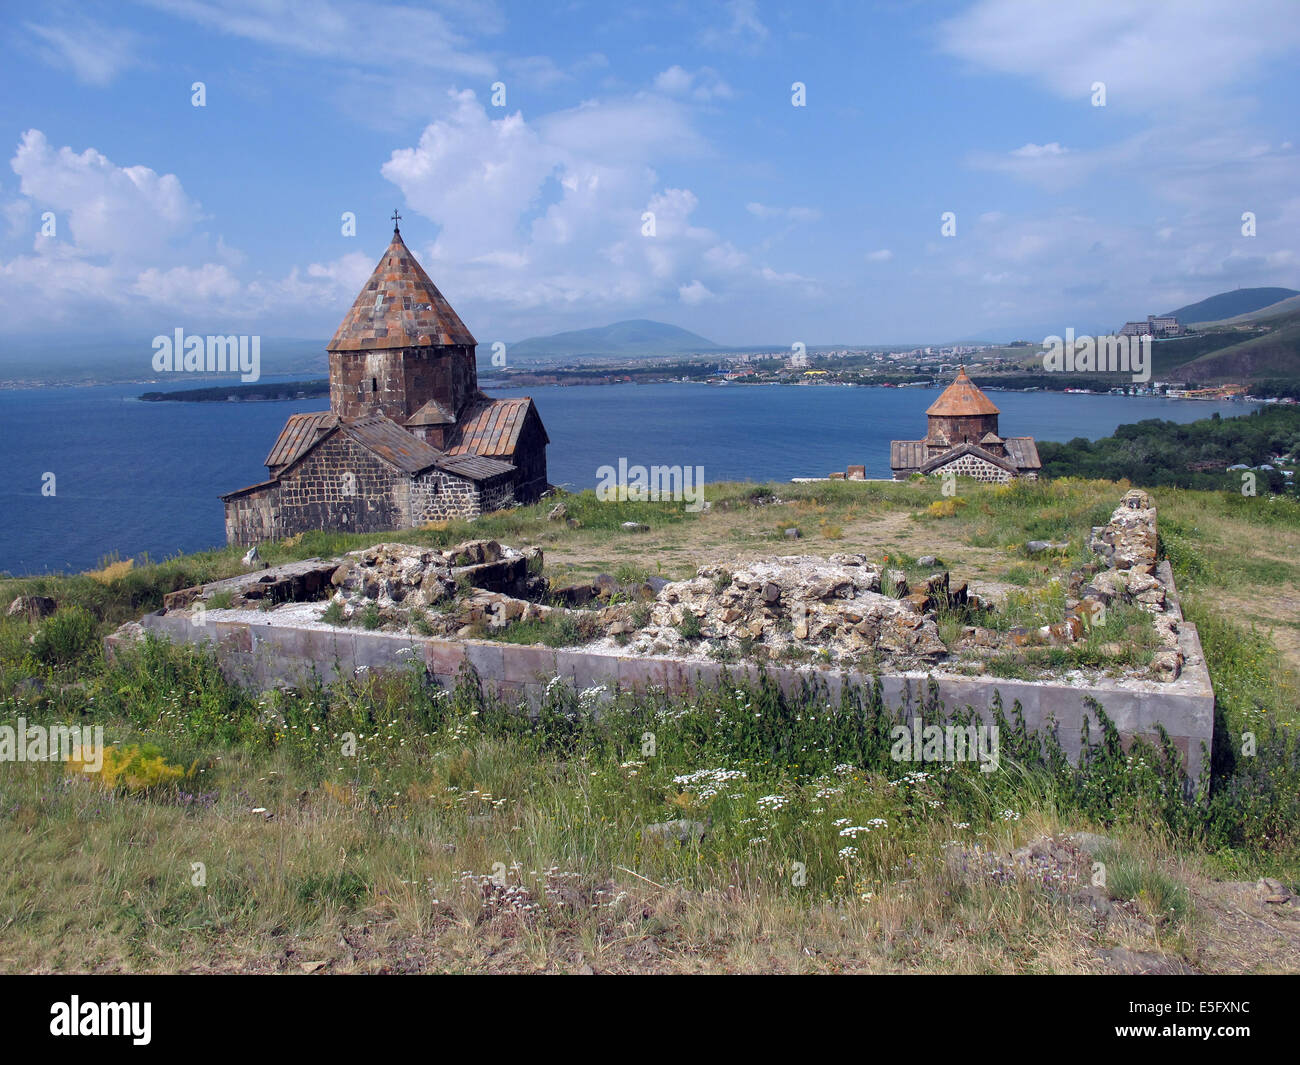 The Sewanawank monastery, founded in 874 at Lake Sewan, Armenia, 24 June 2014. The monastery used to be located on a small island in the lake. Due to a lower water level because of a use of the lake water for irrigation the island with the monastery now is a peninsula. Photo: Jens Kalaene Stock Photo